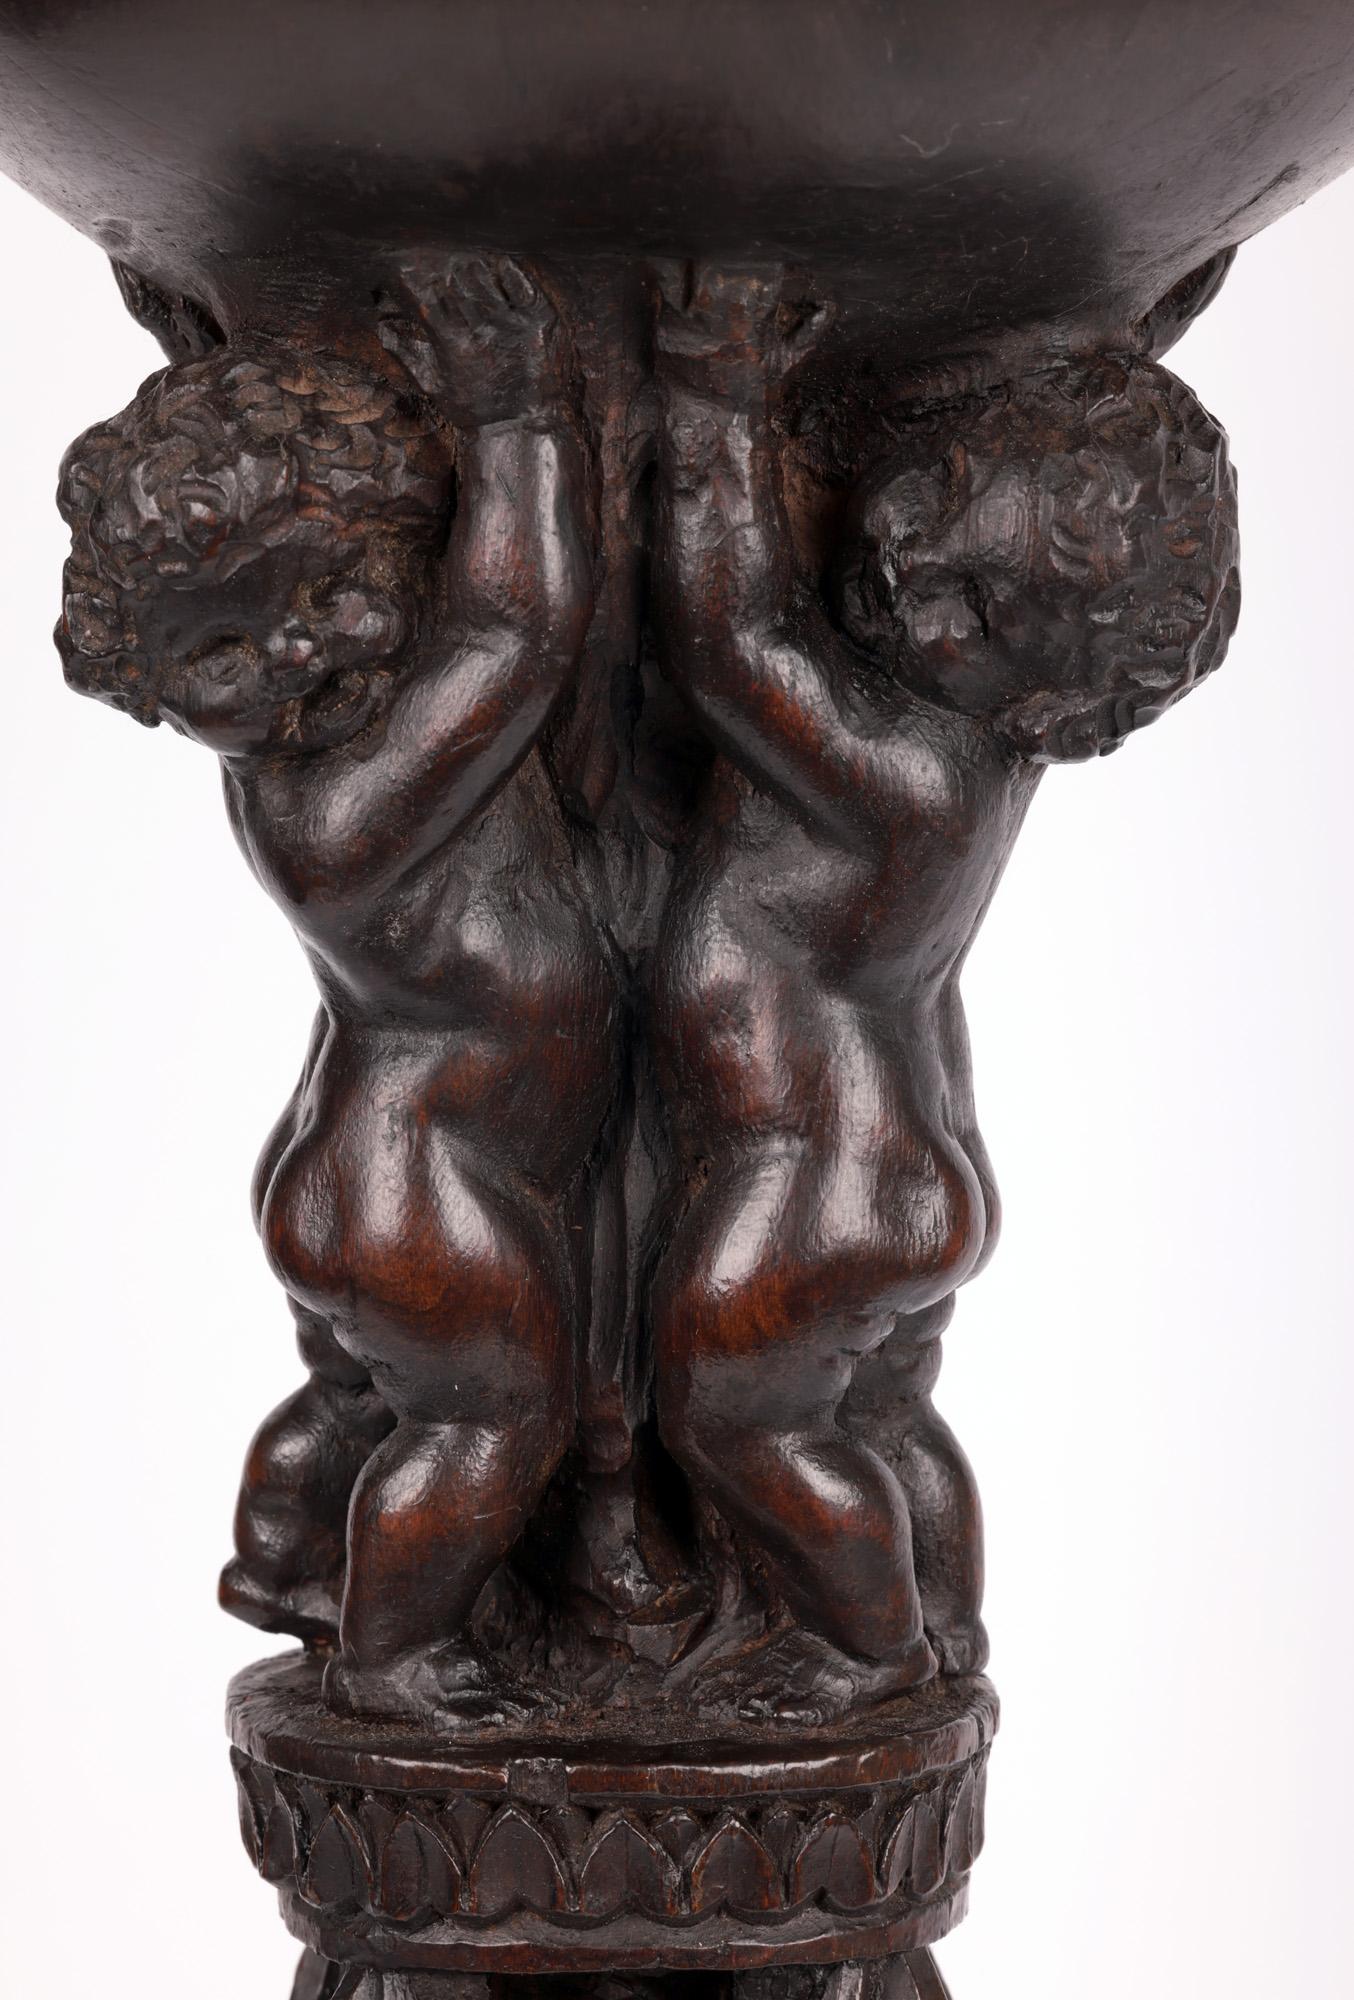 Flemish Carved Pricket Candlestick with Putti Late 16th or Early 17th Century For Sale 5